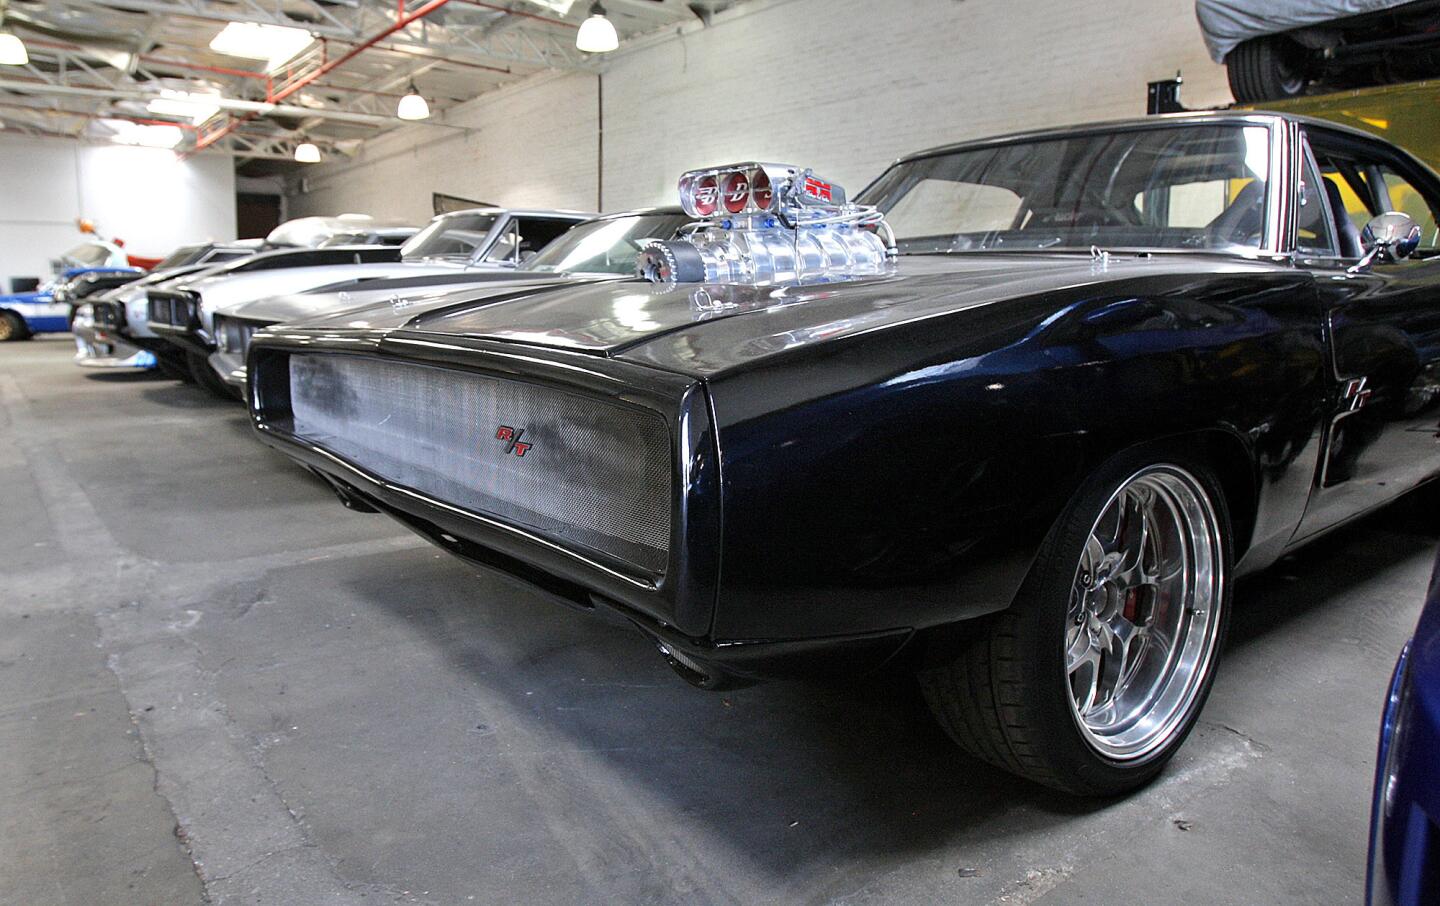 Photo Gallery: Fast and Furious car creators at Vehicle Effects, Inc.